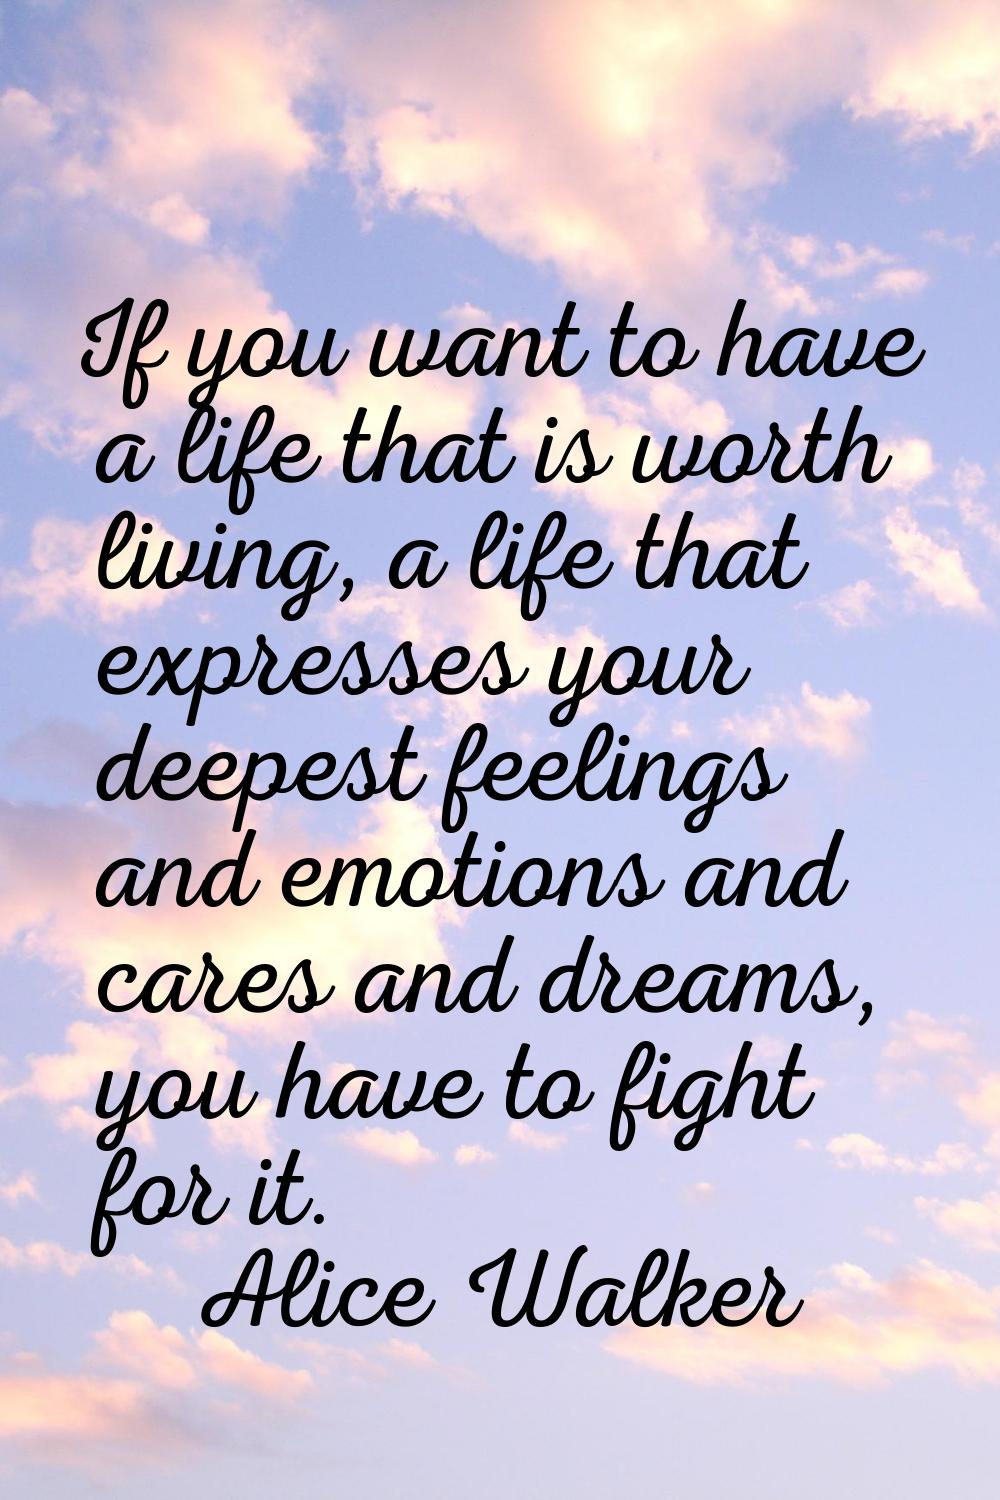 If you want to have a life that is worth living, a life that expresses your deepest feelings and em